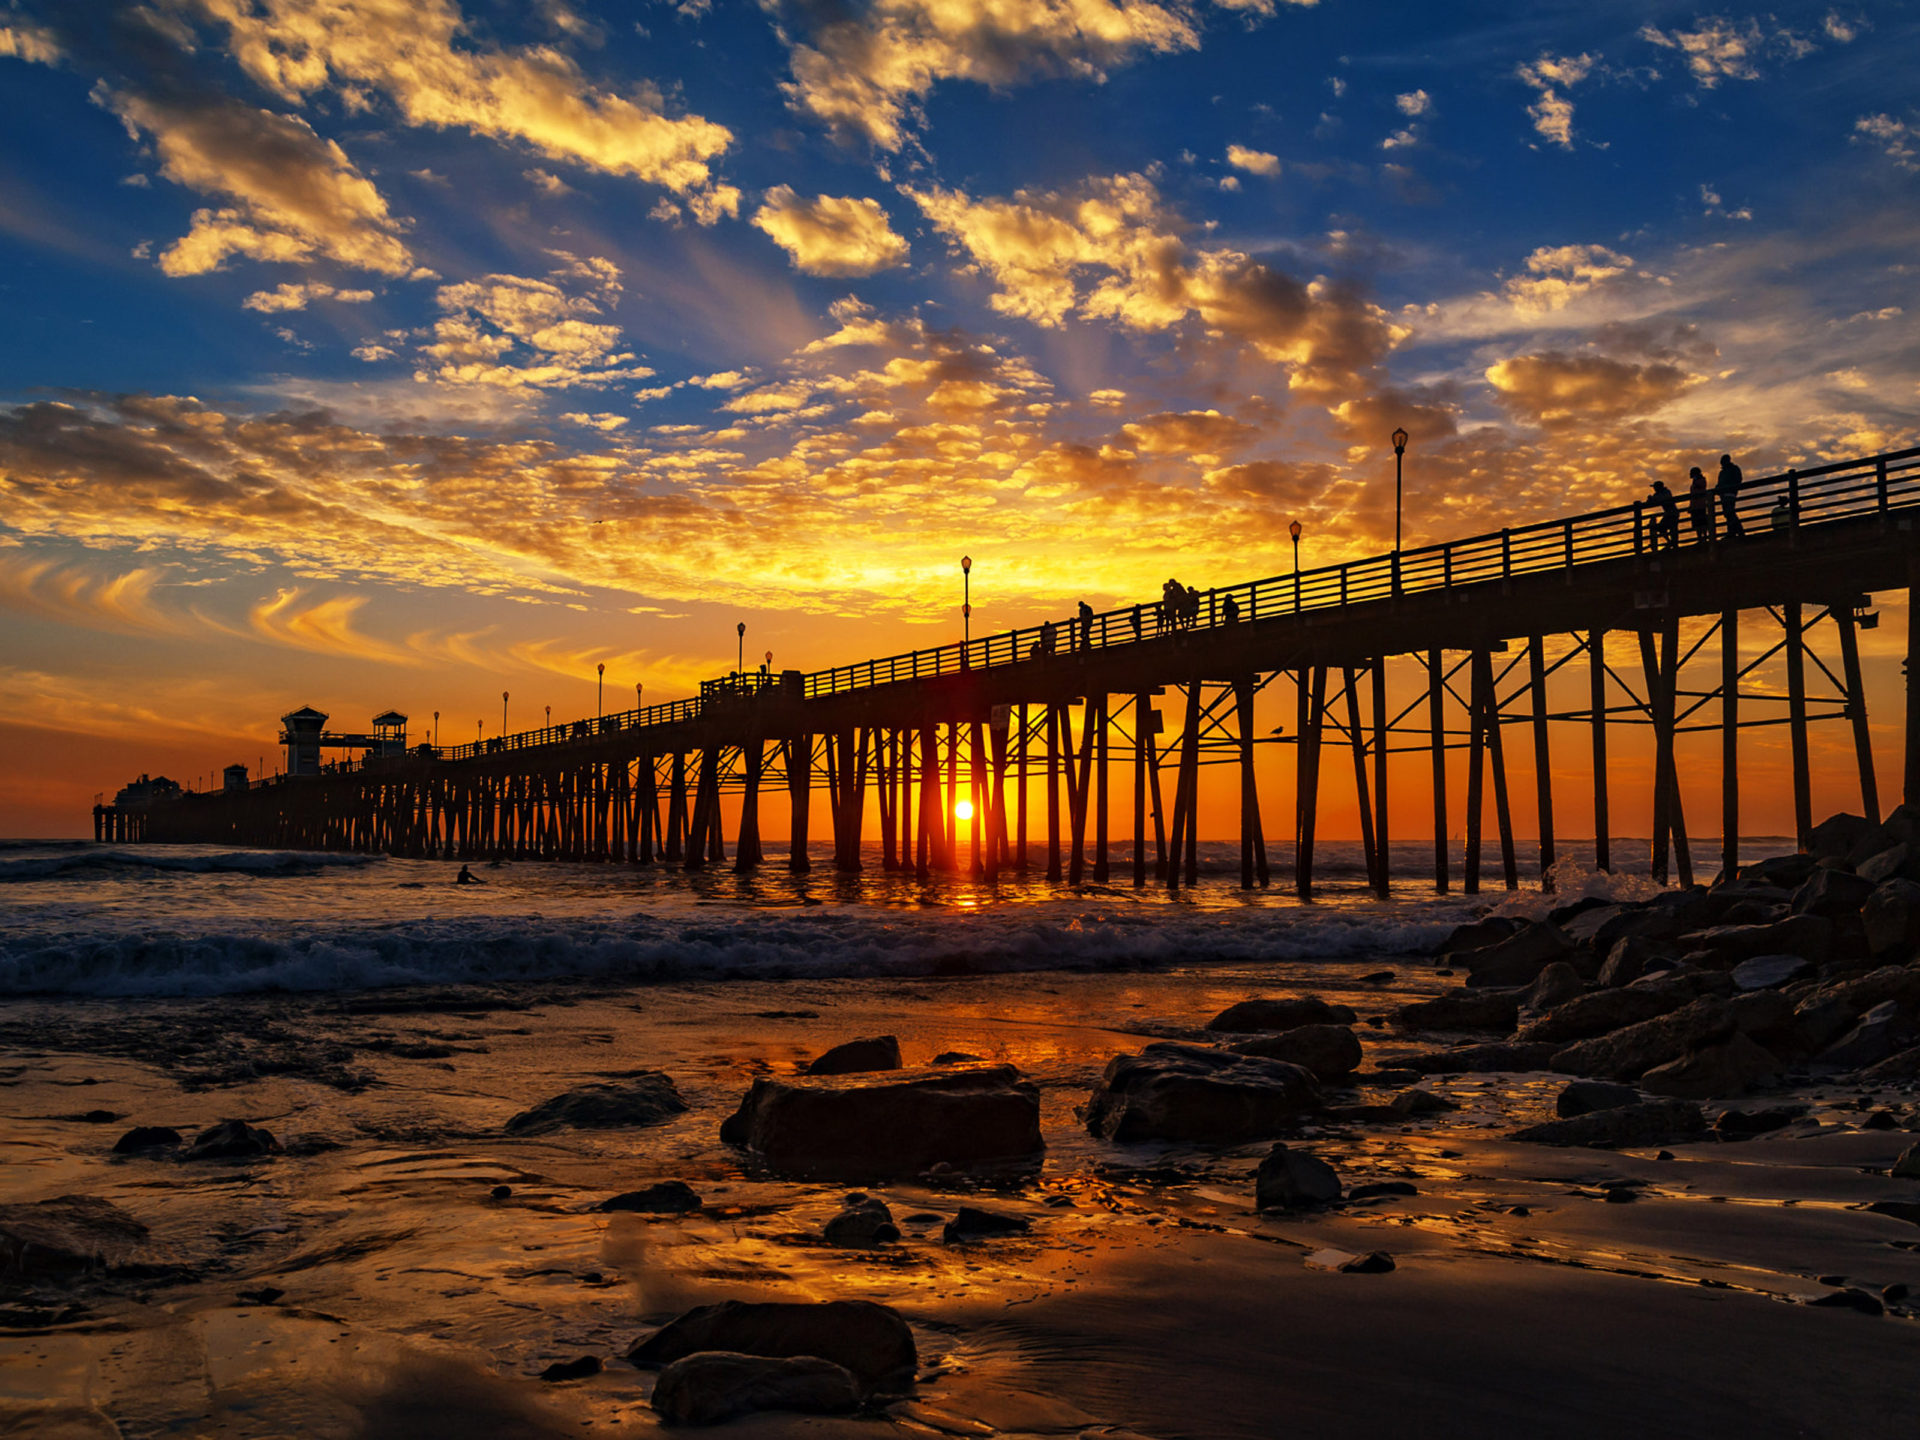 Red sunset at the oceanside pier san diego california united states of america desktop wallpaper hd for mobile phones and laptops x